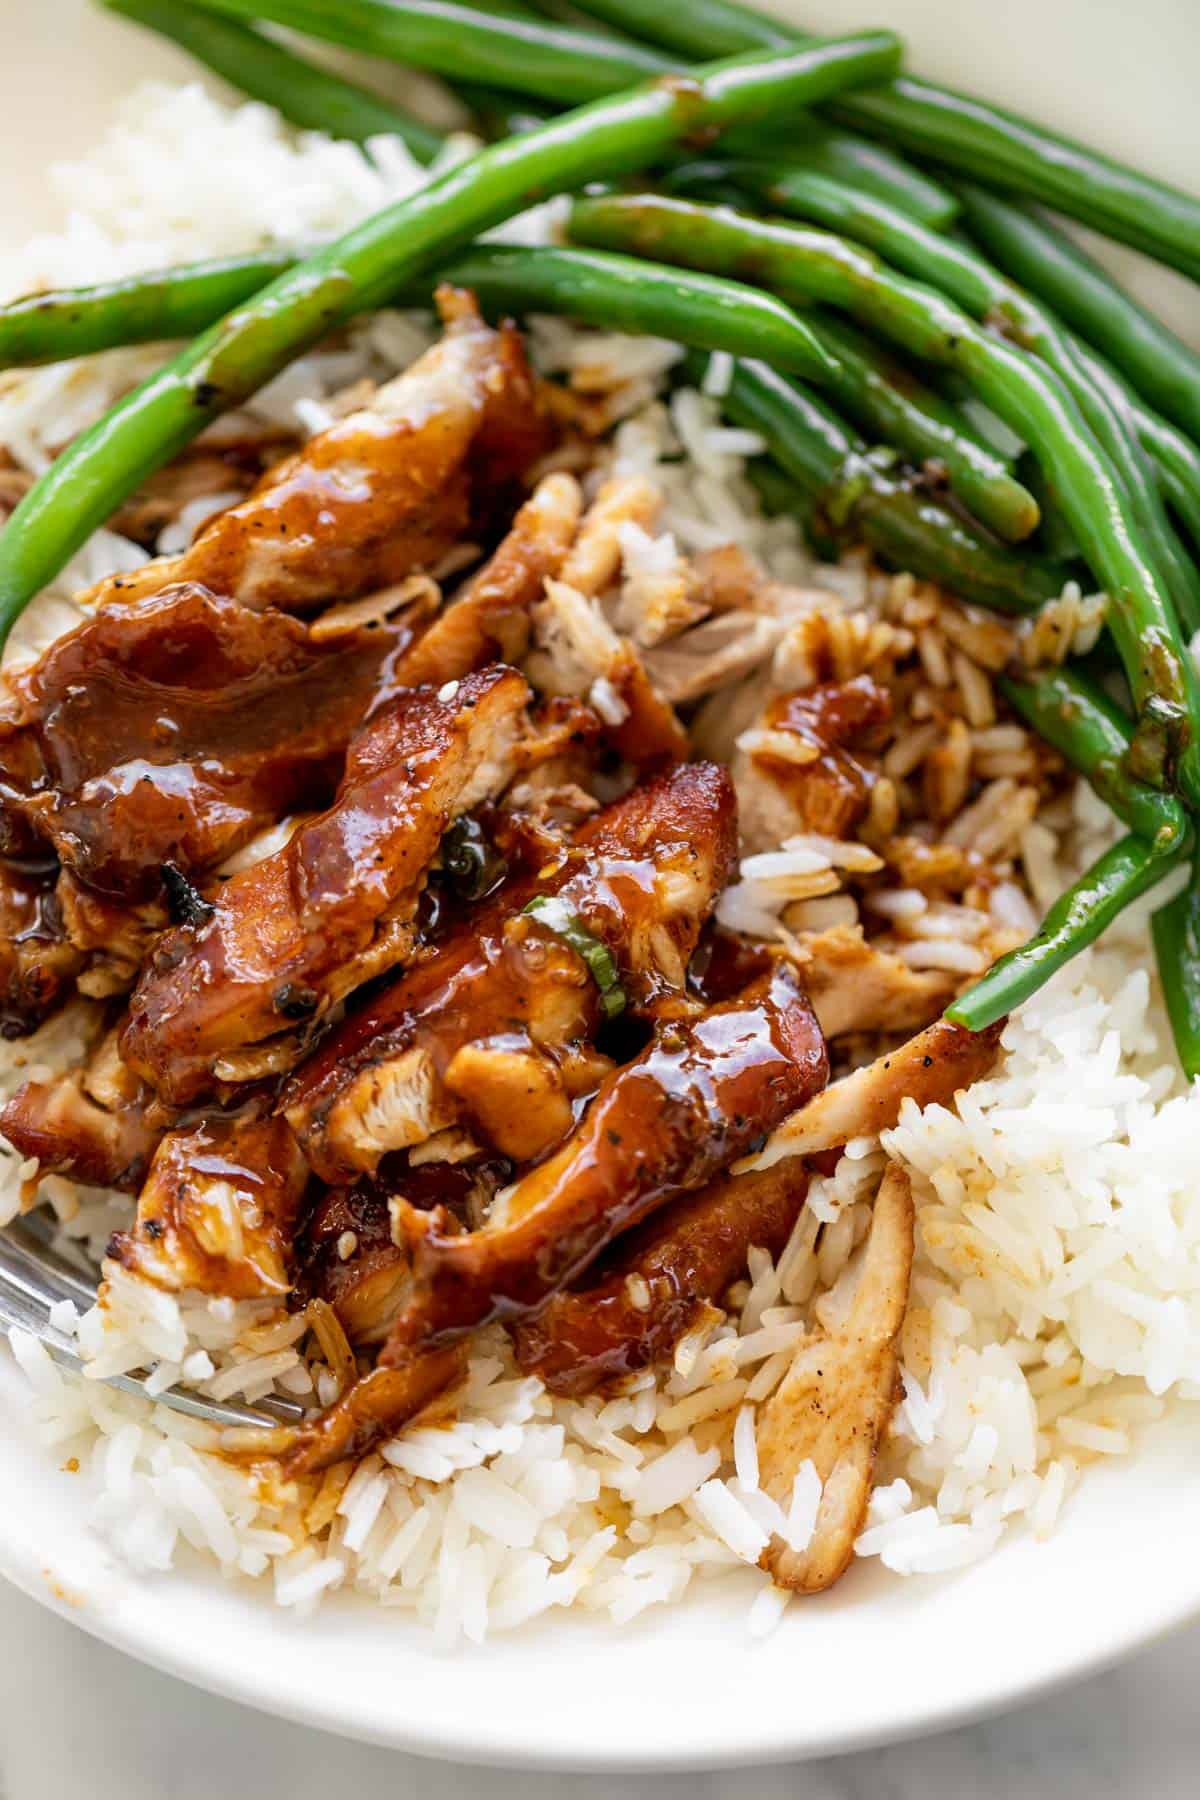 Serving suggestion: Slow cooked honey garlic chicken sits on top of plain white rice in a white bowl with sautéed green beans.